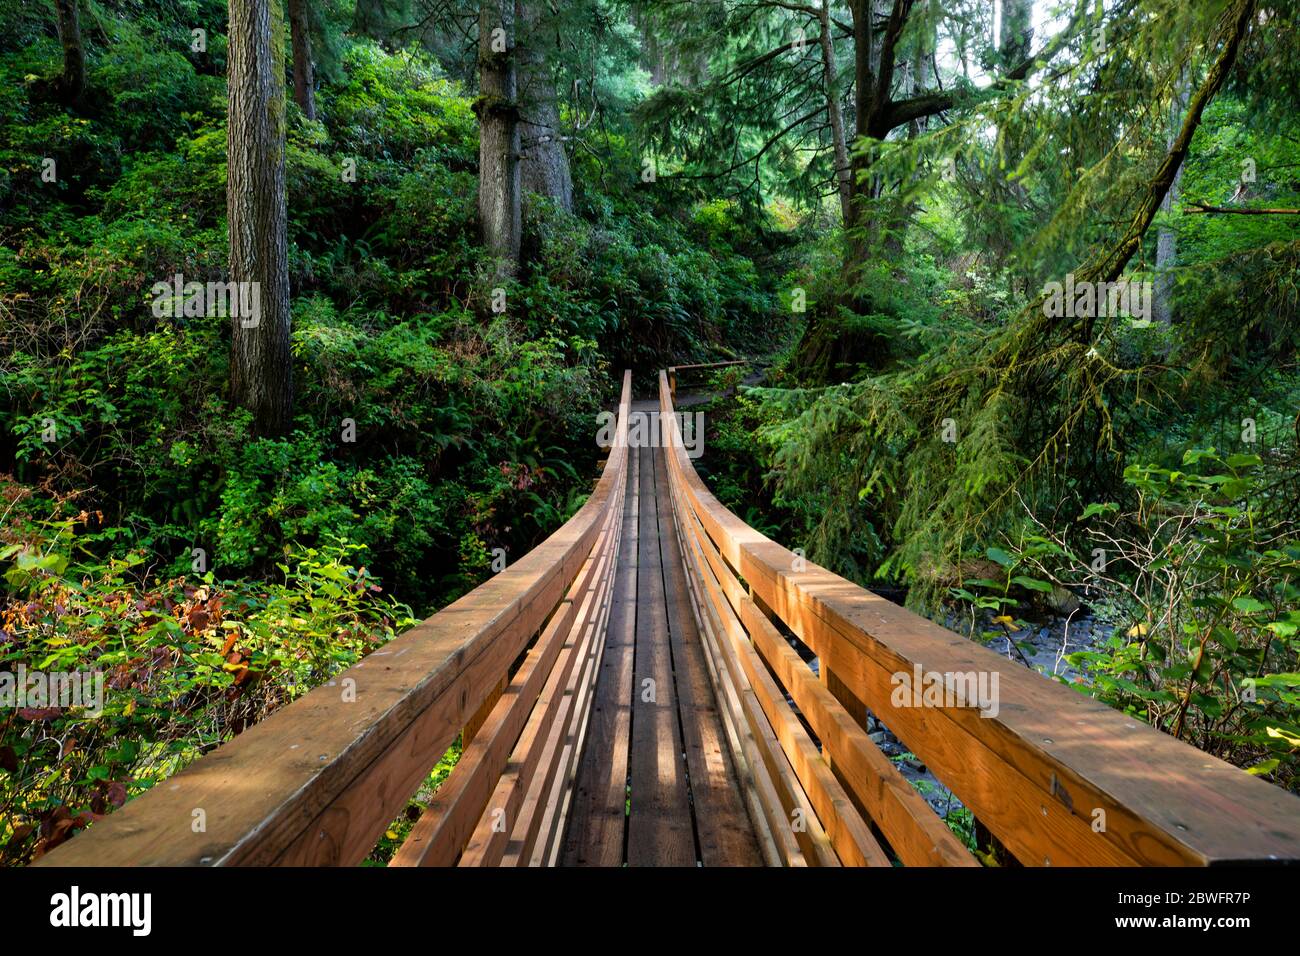 View of wooden bridge in forest, Portland, Oregon, USA Stock Photo